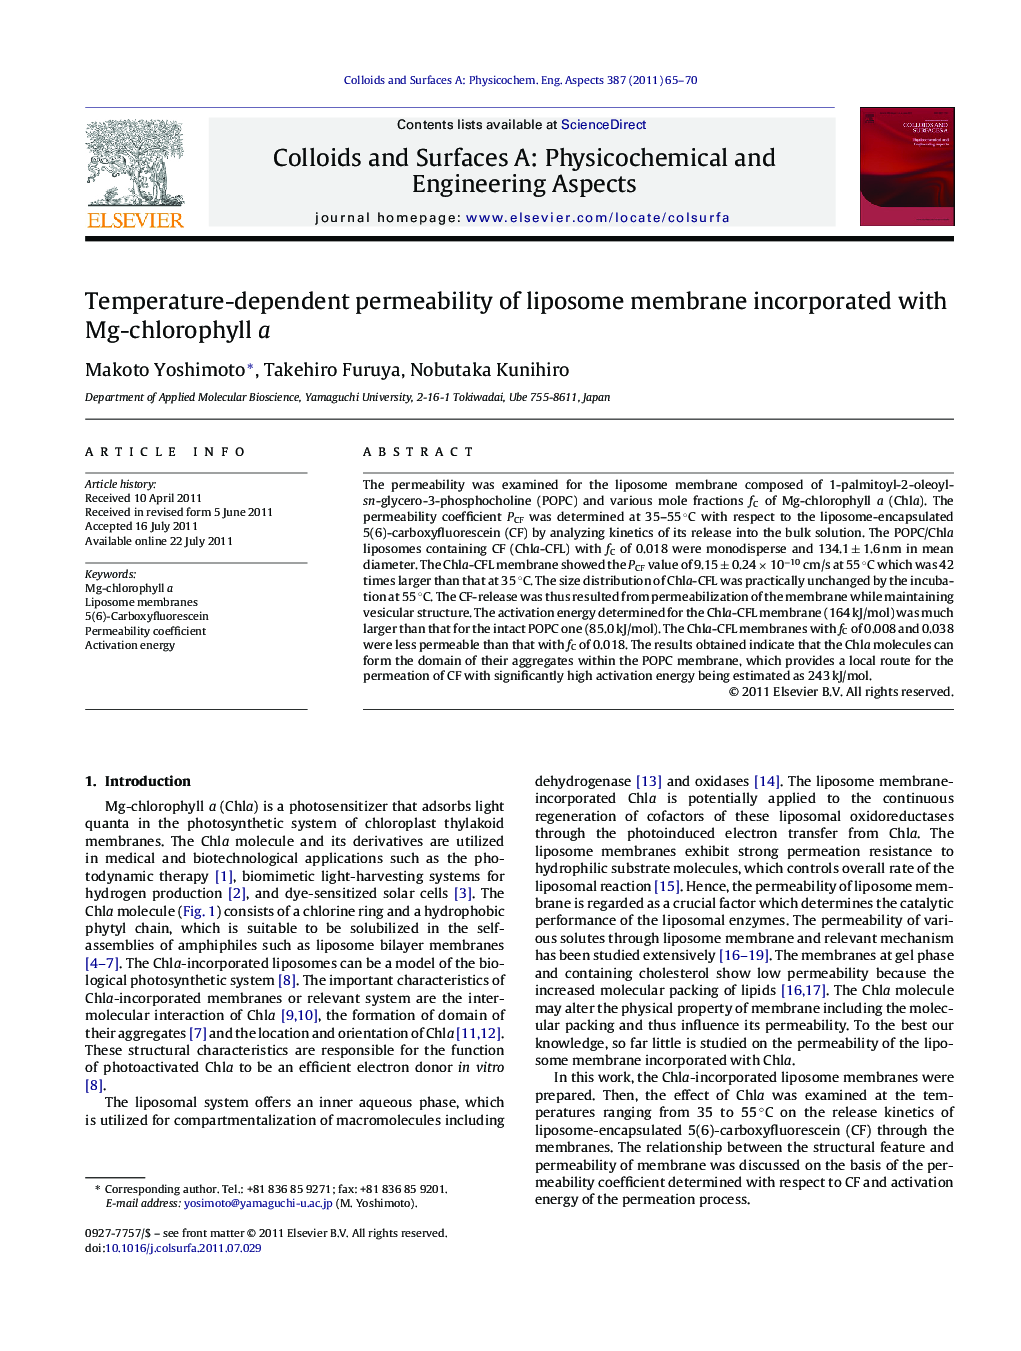 Temperature-dependent permeability of liposome membrane incorporated with Mg-chlorophyll a